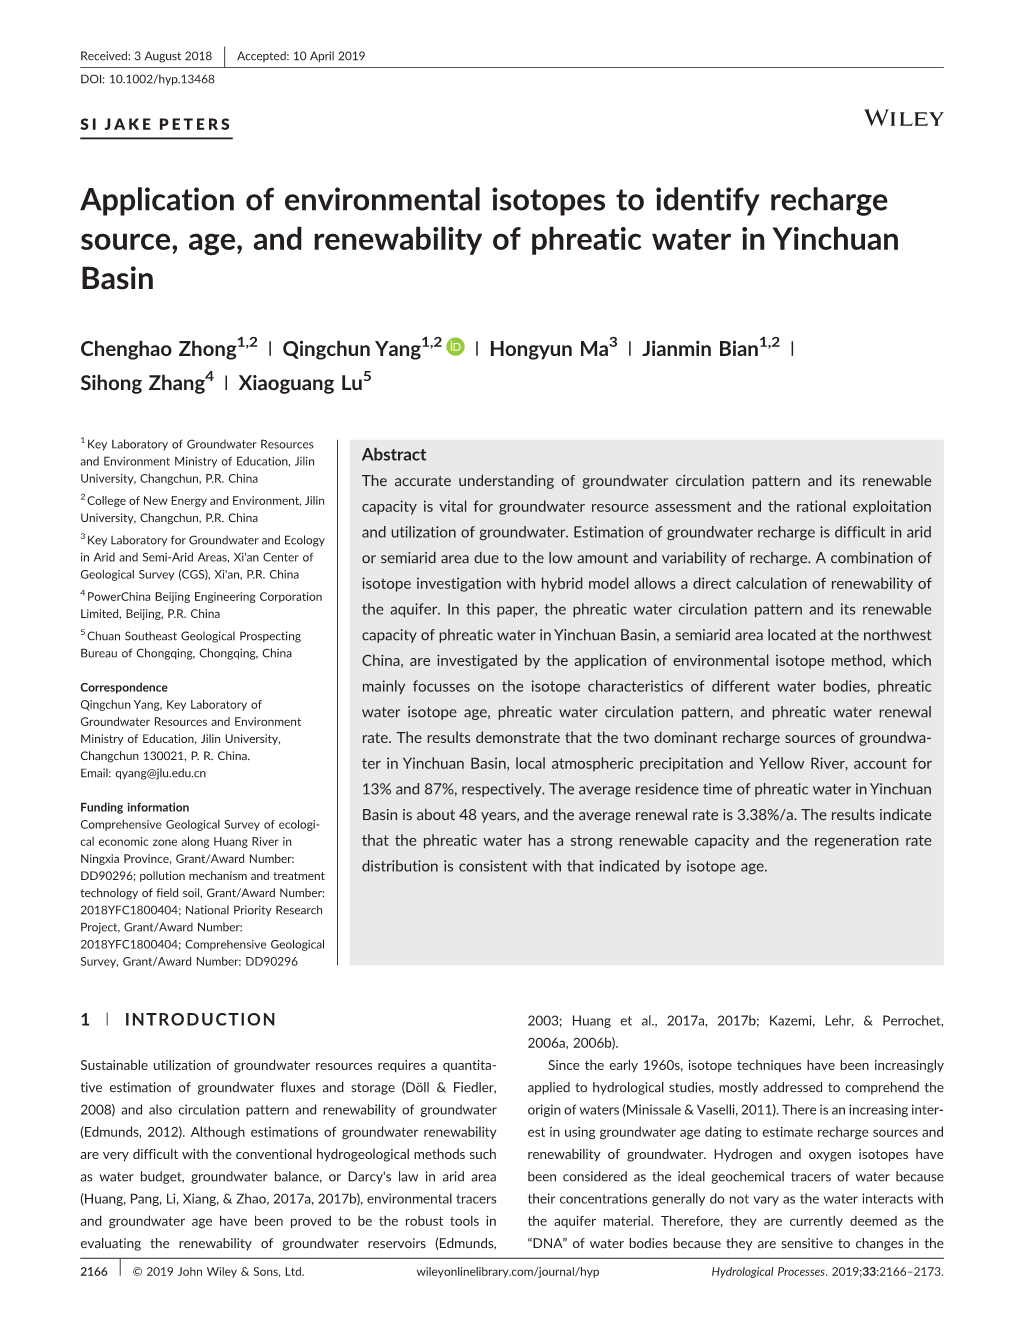 Application of Environmental Isotopes to Identify Recharge Source, Age, and Renewability of Phreatic Water in Yinchuan Basin